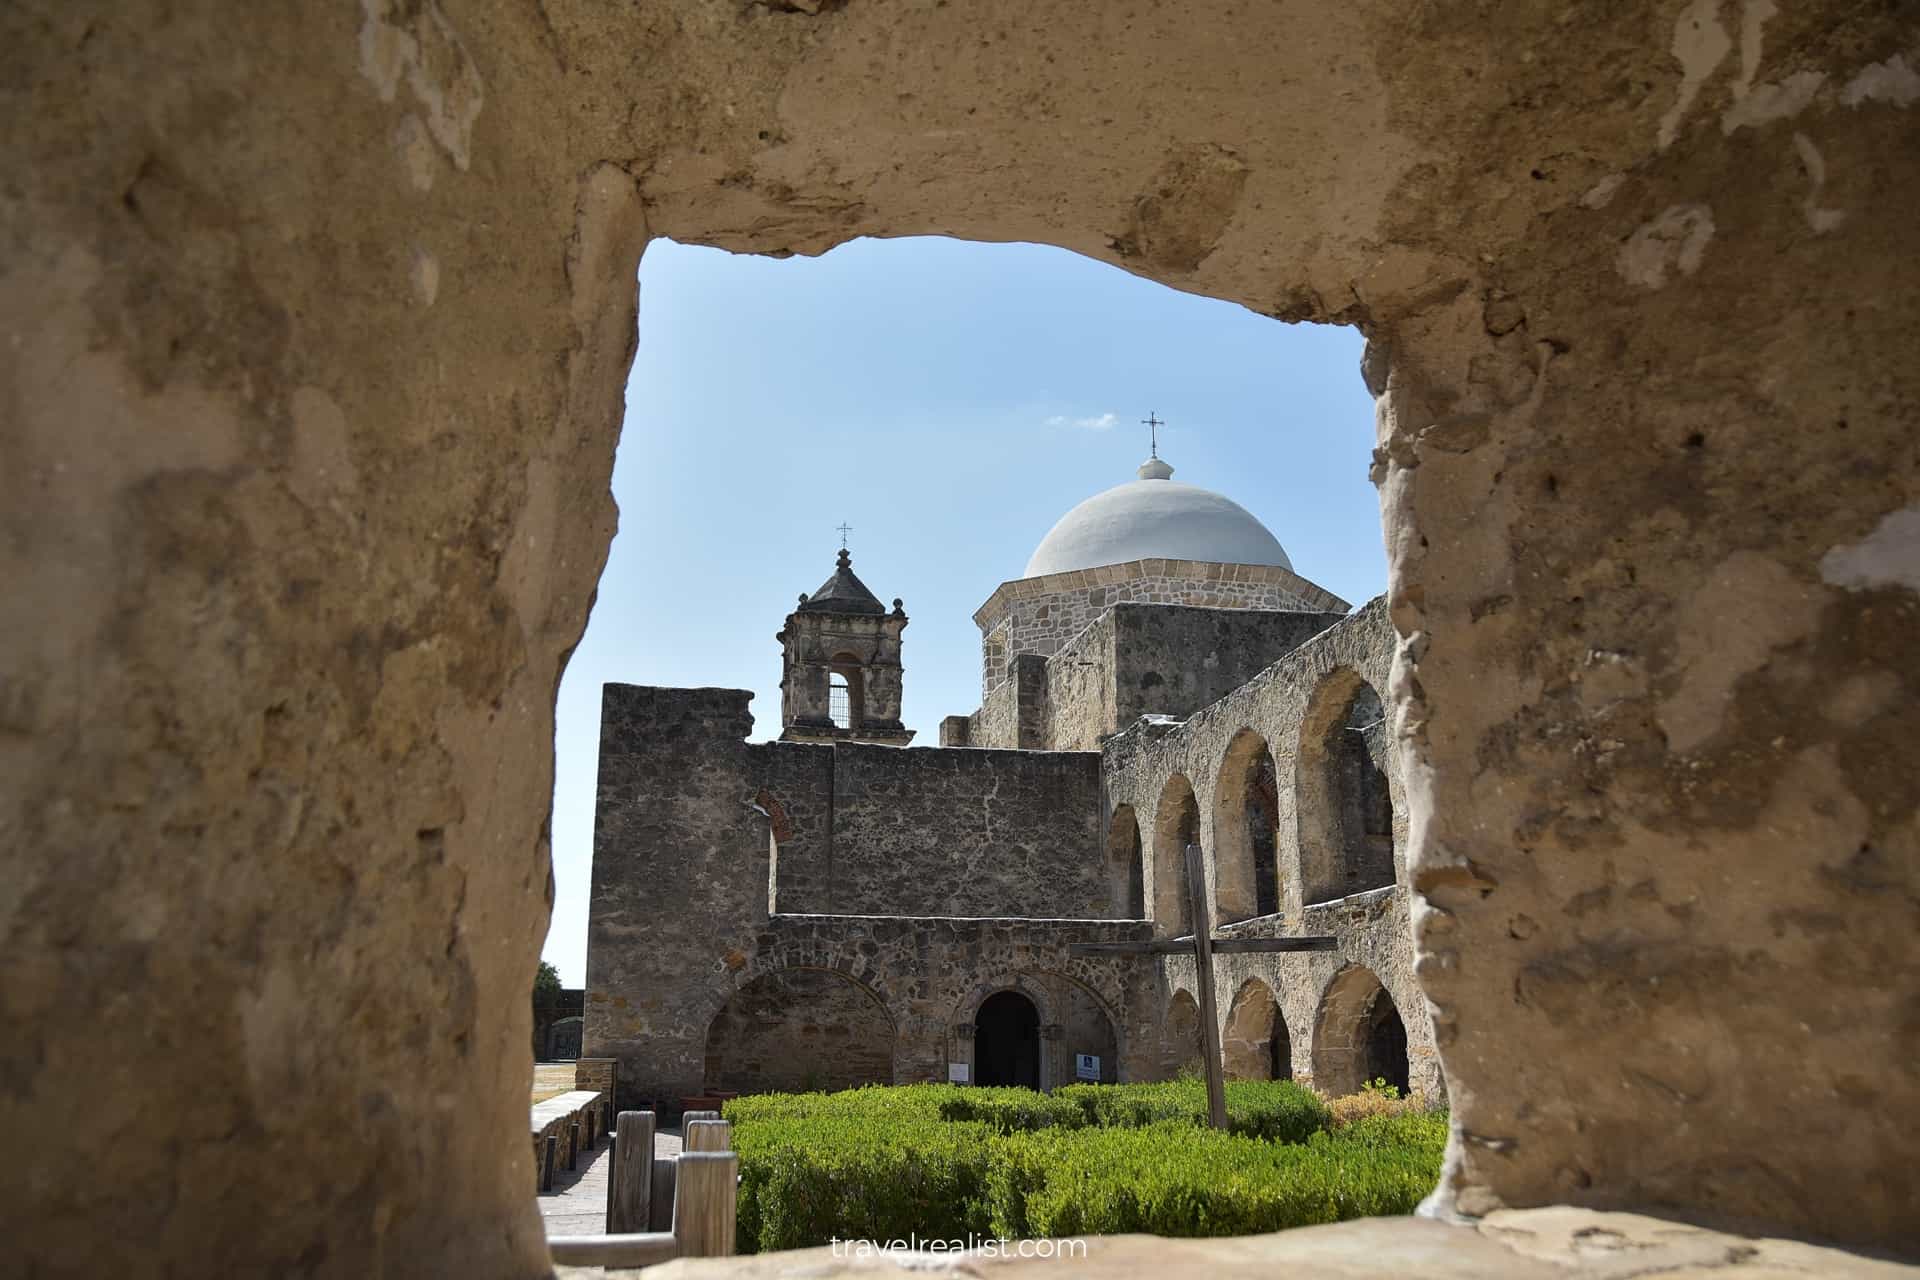 San Antonio Missions: A Self-Guided Tour of 5 Historic Sites